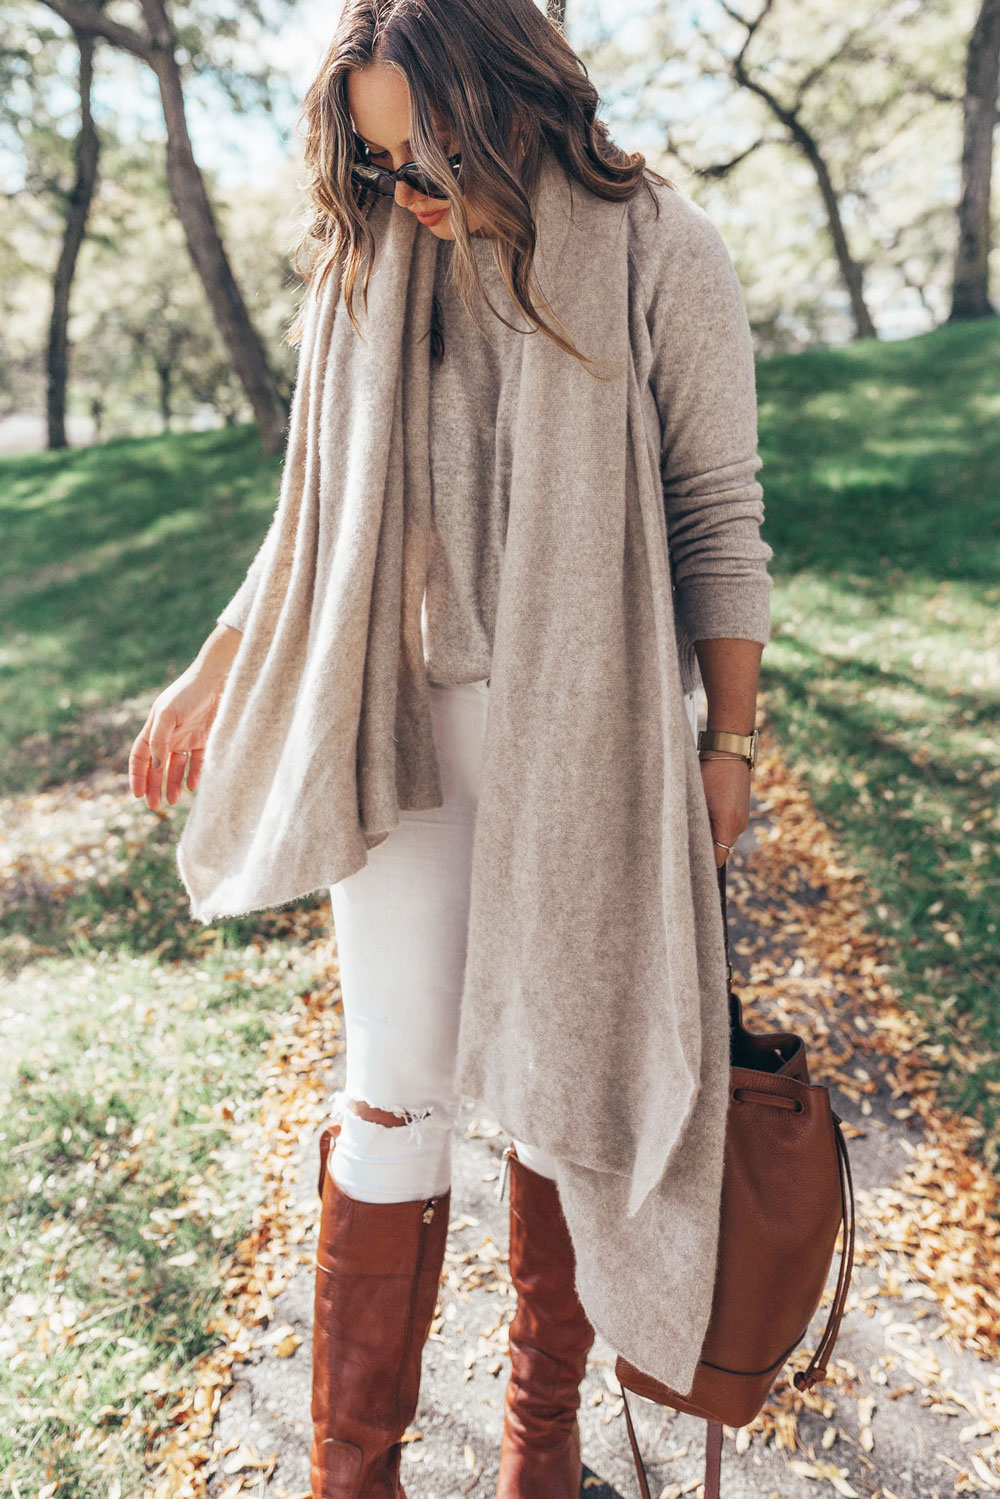 Cashmere sweater outfit ideas